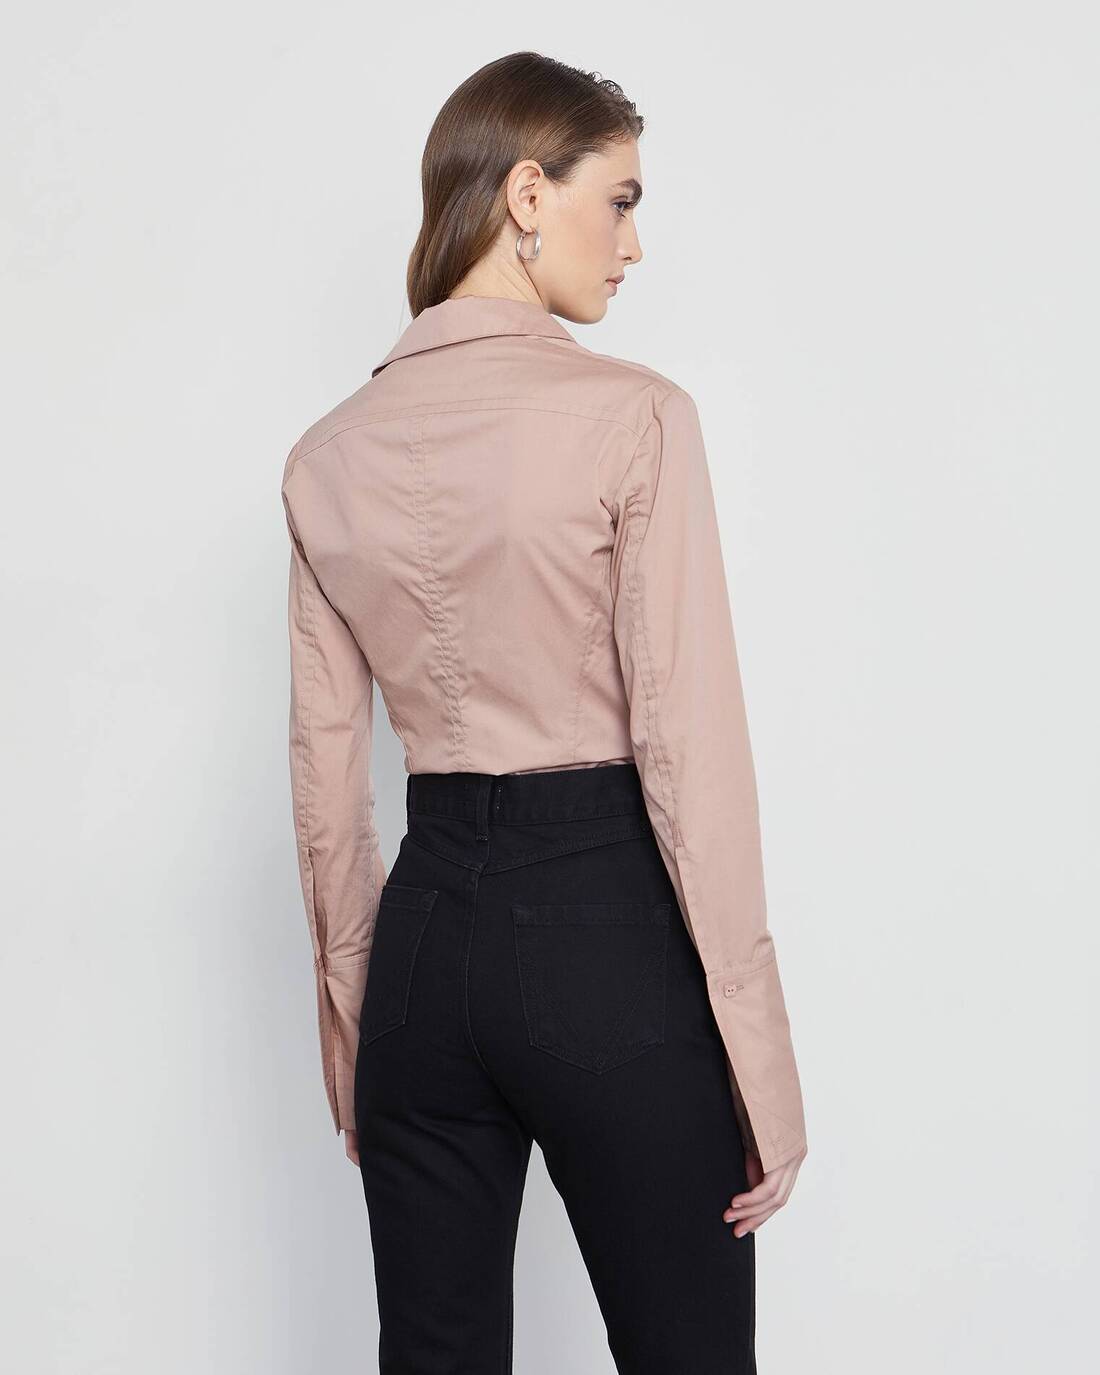 Fitted silhouette blouse  